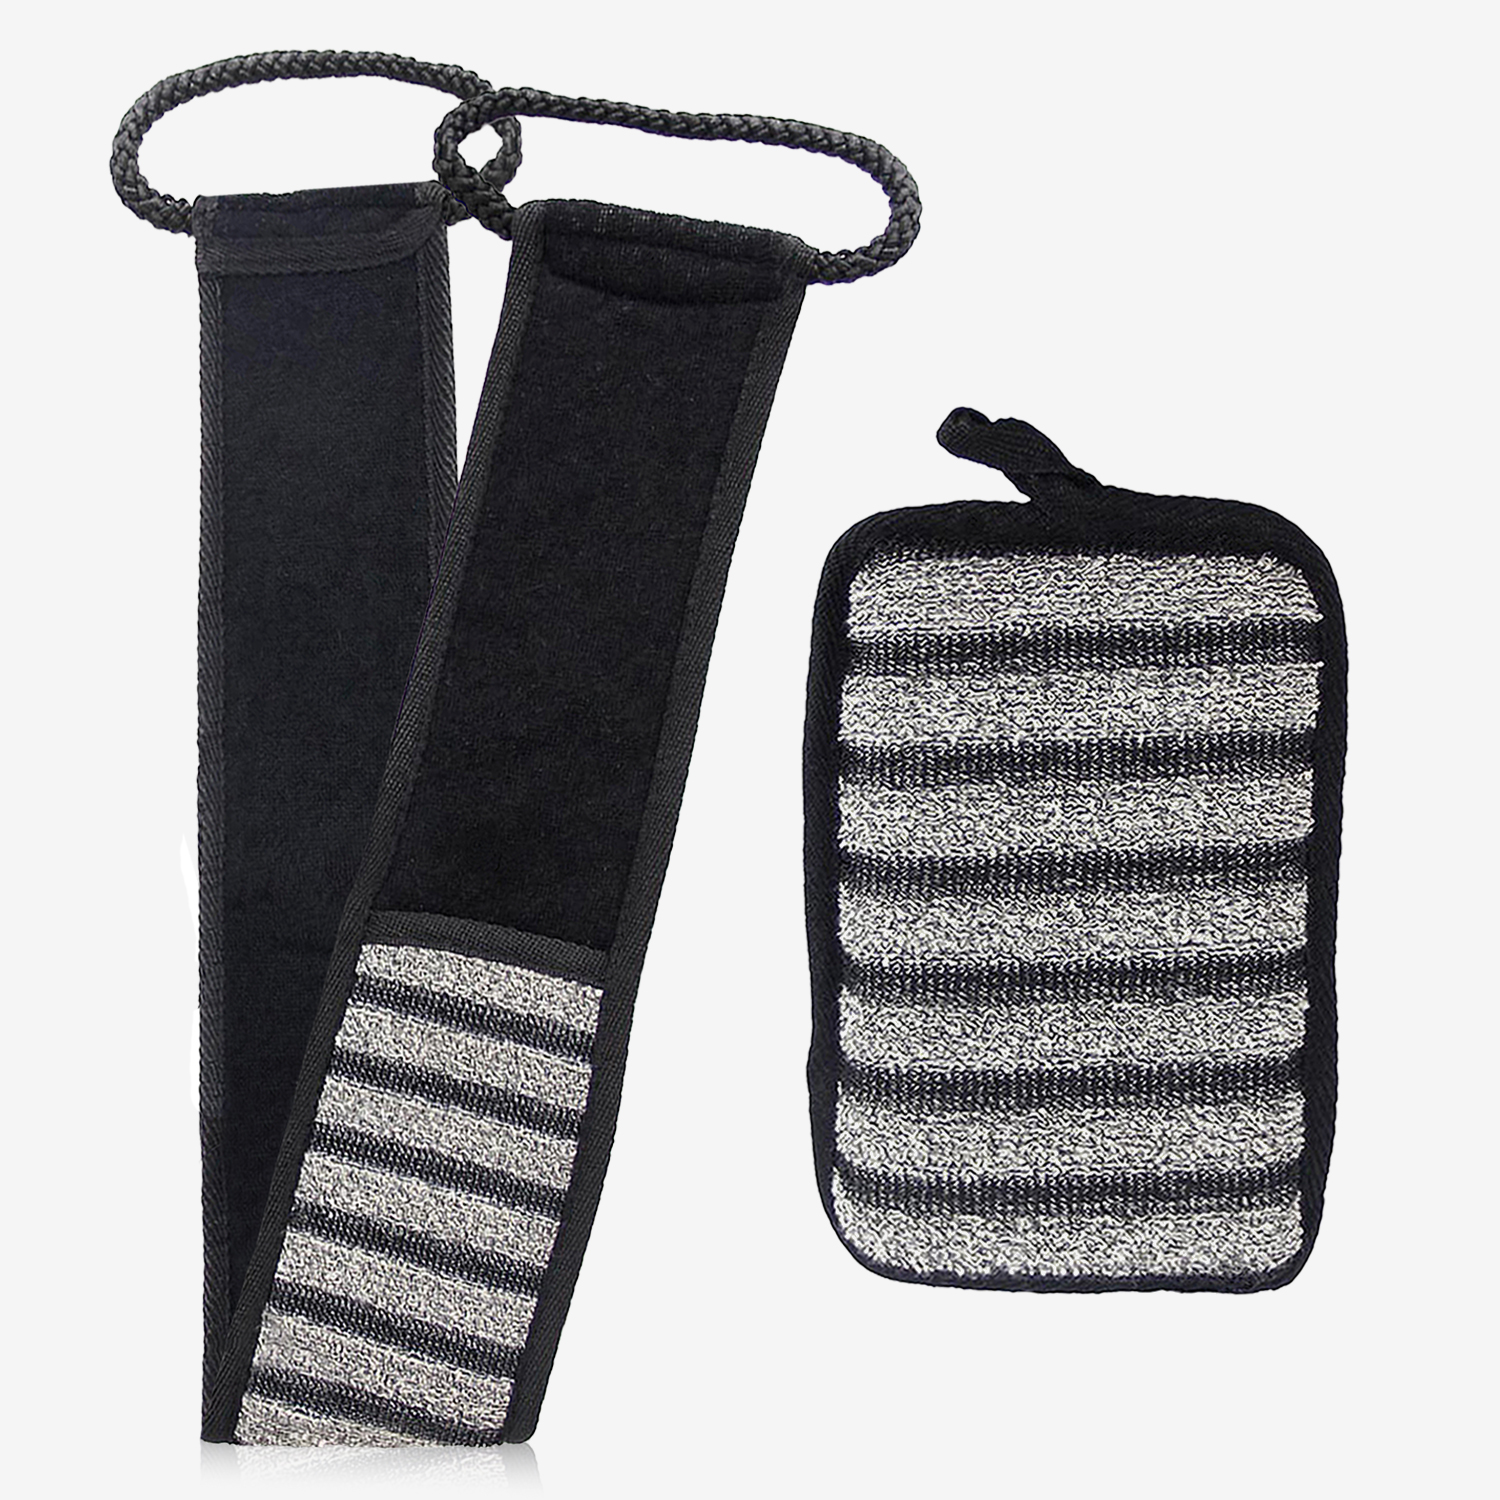 Body Scrubber Set of 2 pcs - with Bamboo Charcoal